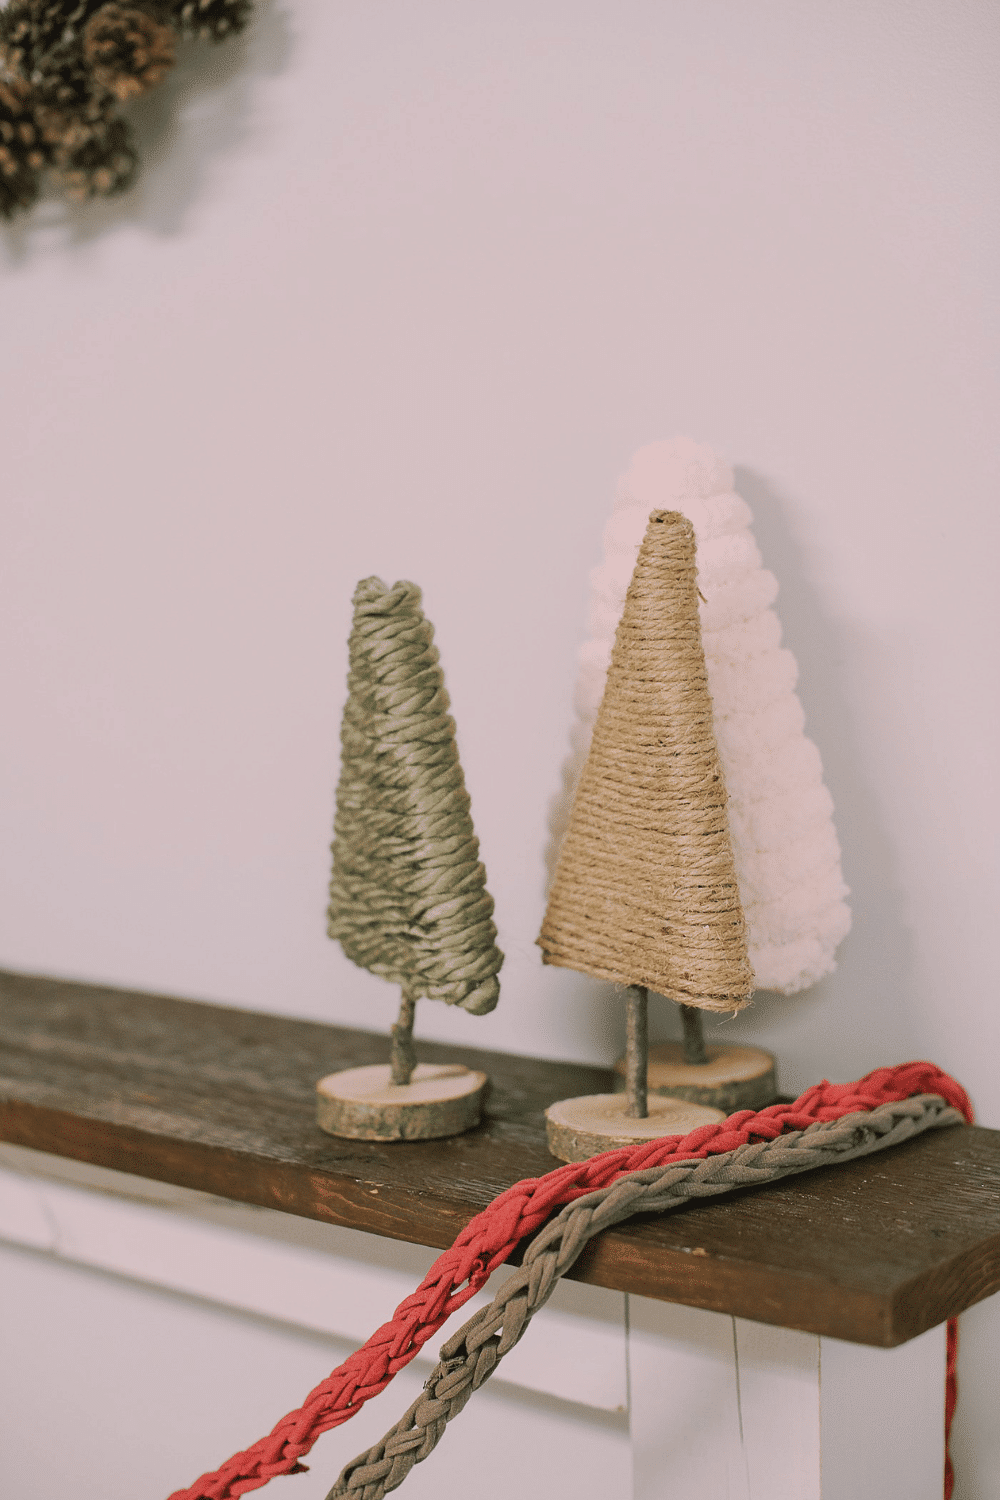 How to Make a Finger-Knit Garland using T-Shirt Yarn